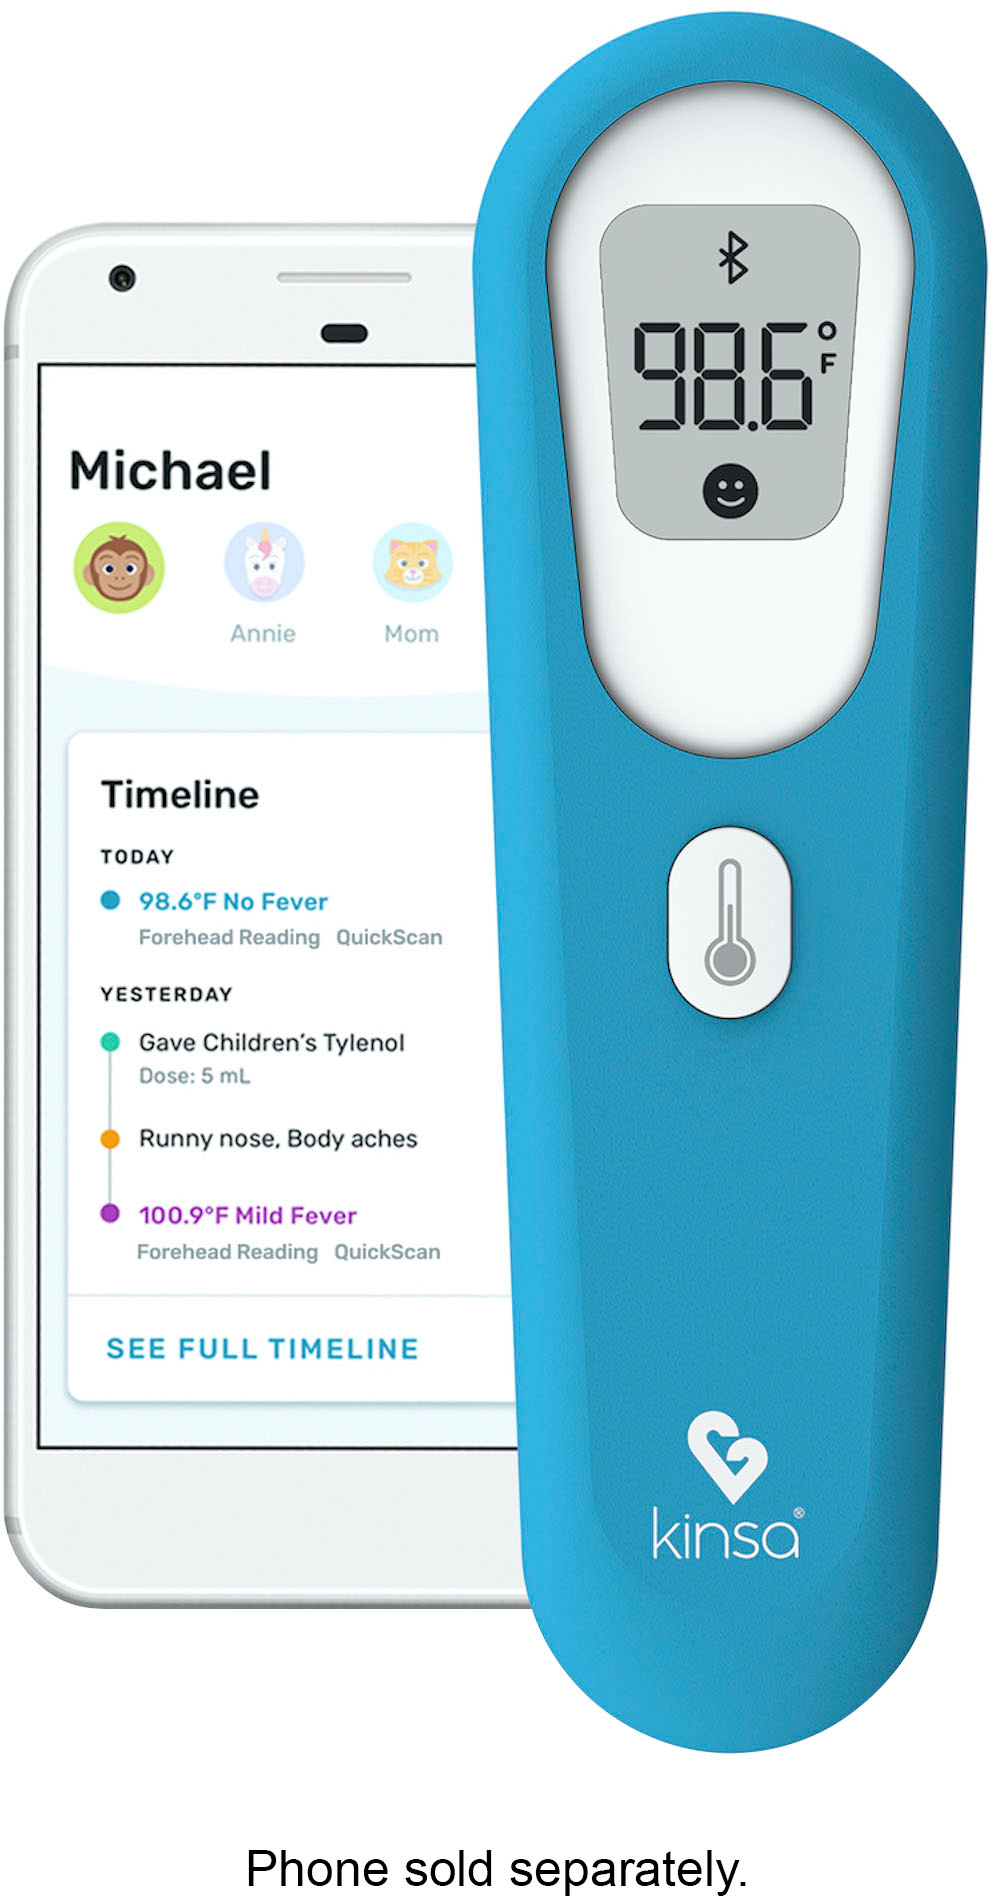 This smart thermometer keeps baby healthy - CNET